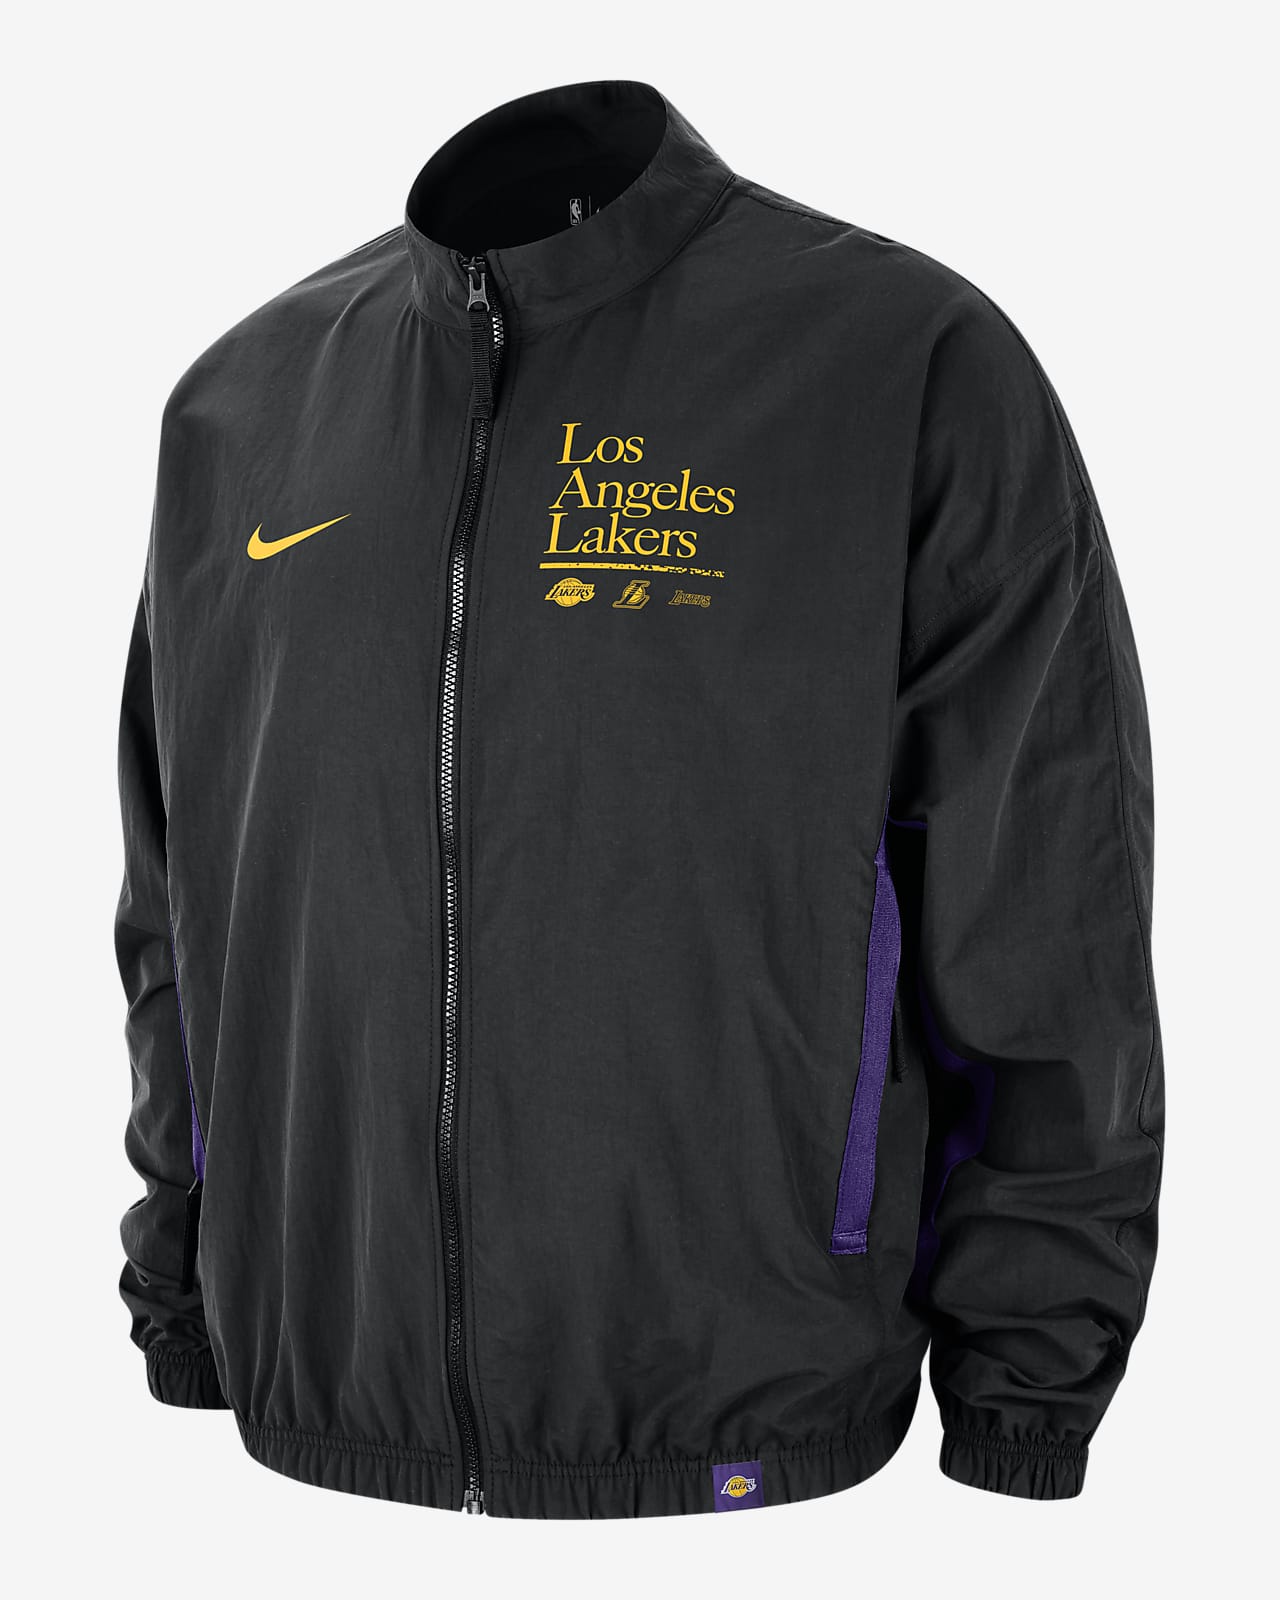 Los Angeles Lakers DNA Courtside Men's Nike NBA Woven Graphic Jacket